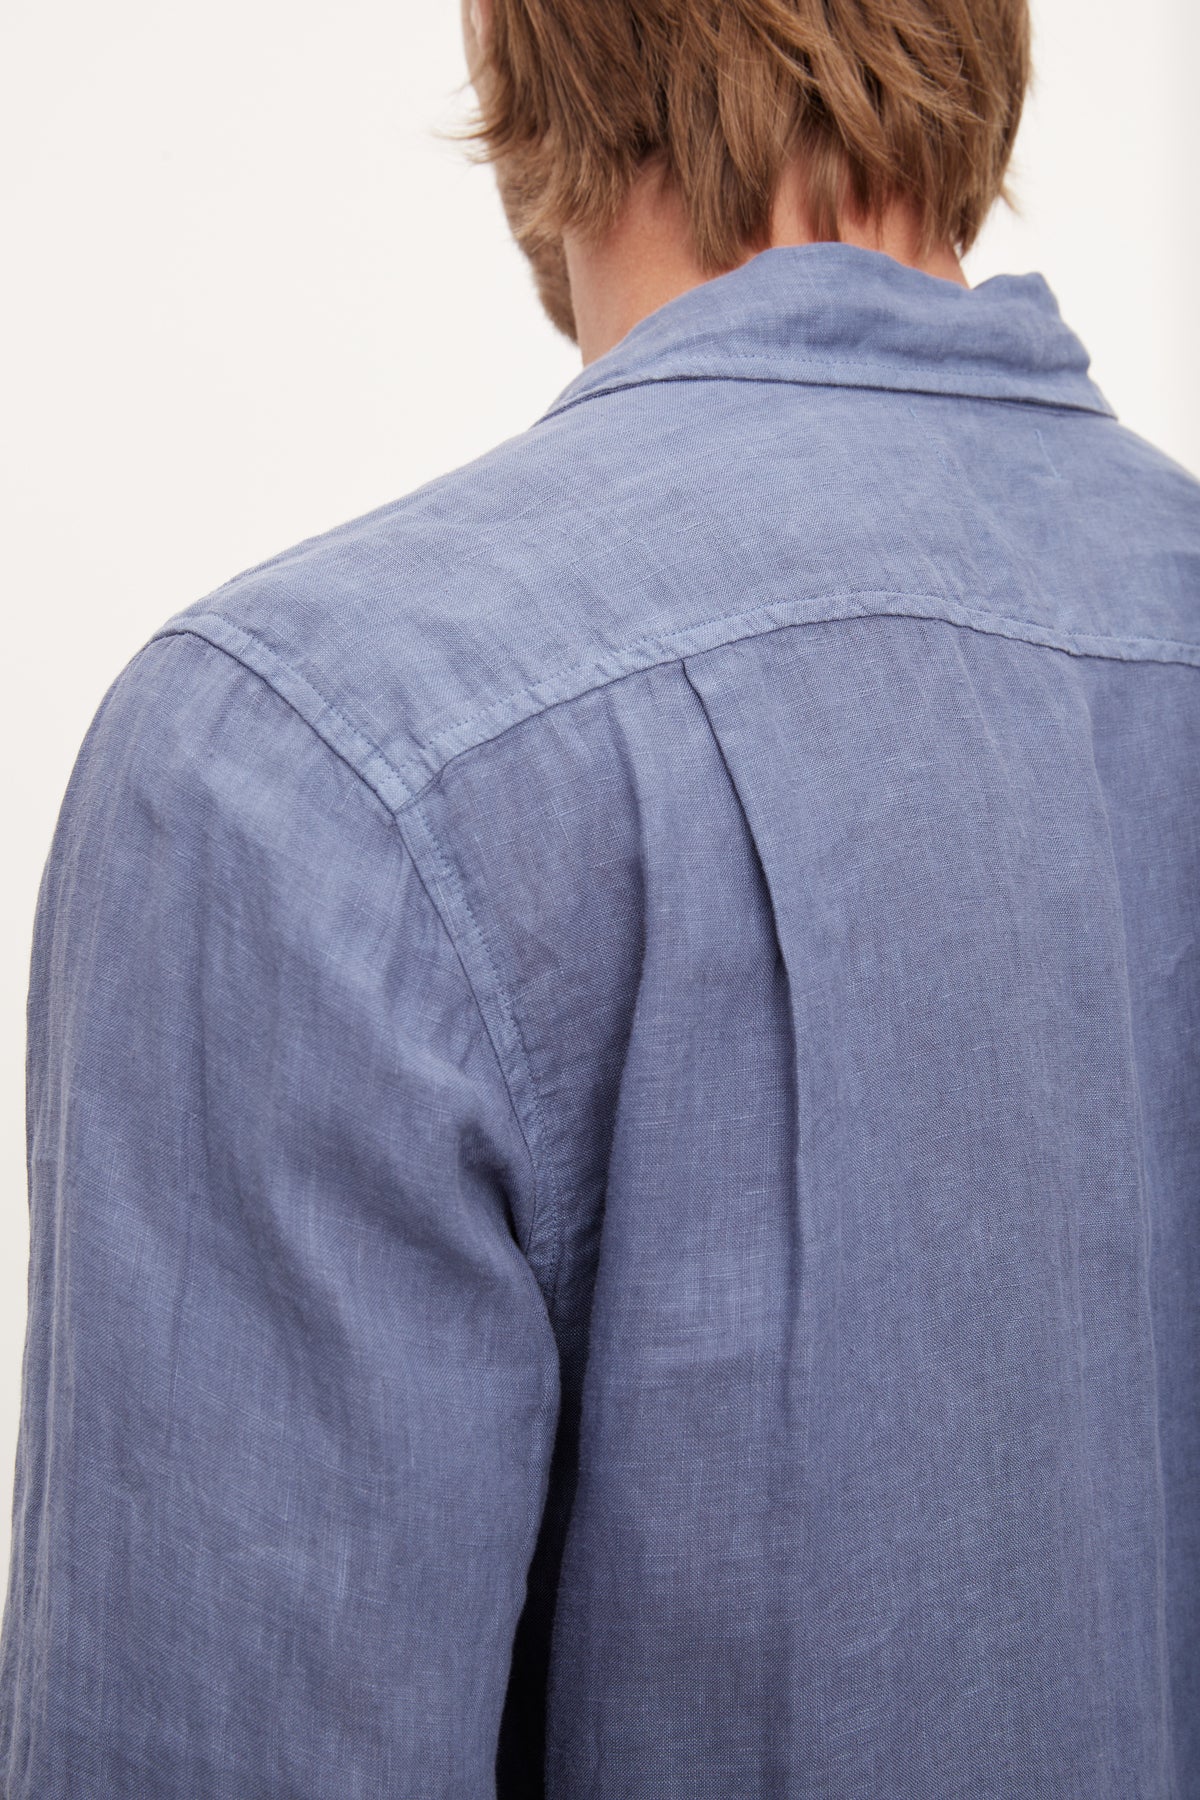   The stylish back view of a man wearing a Velvet by Graham & Spencer BENTON LINEN BUTTON-UP SHIRT. 